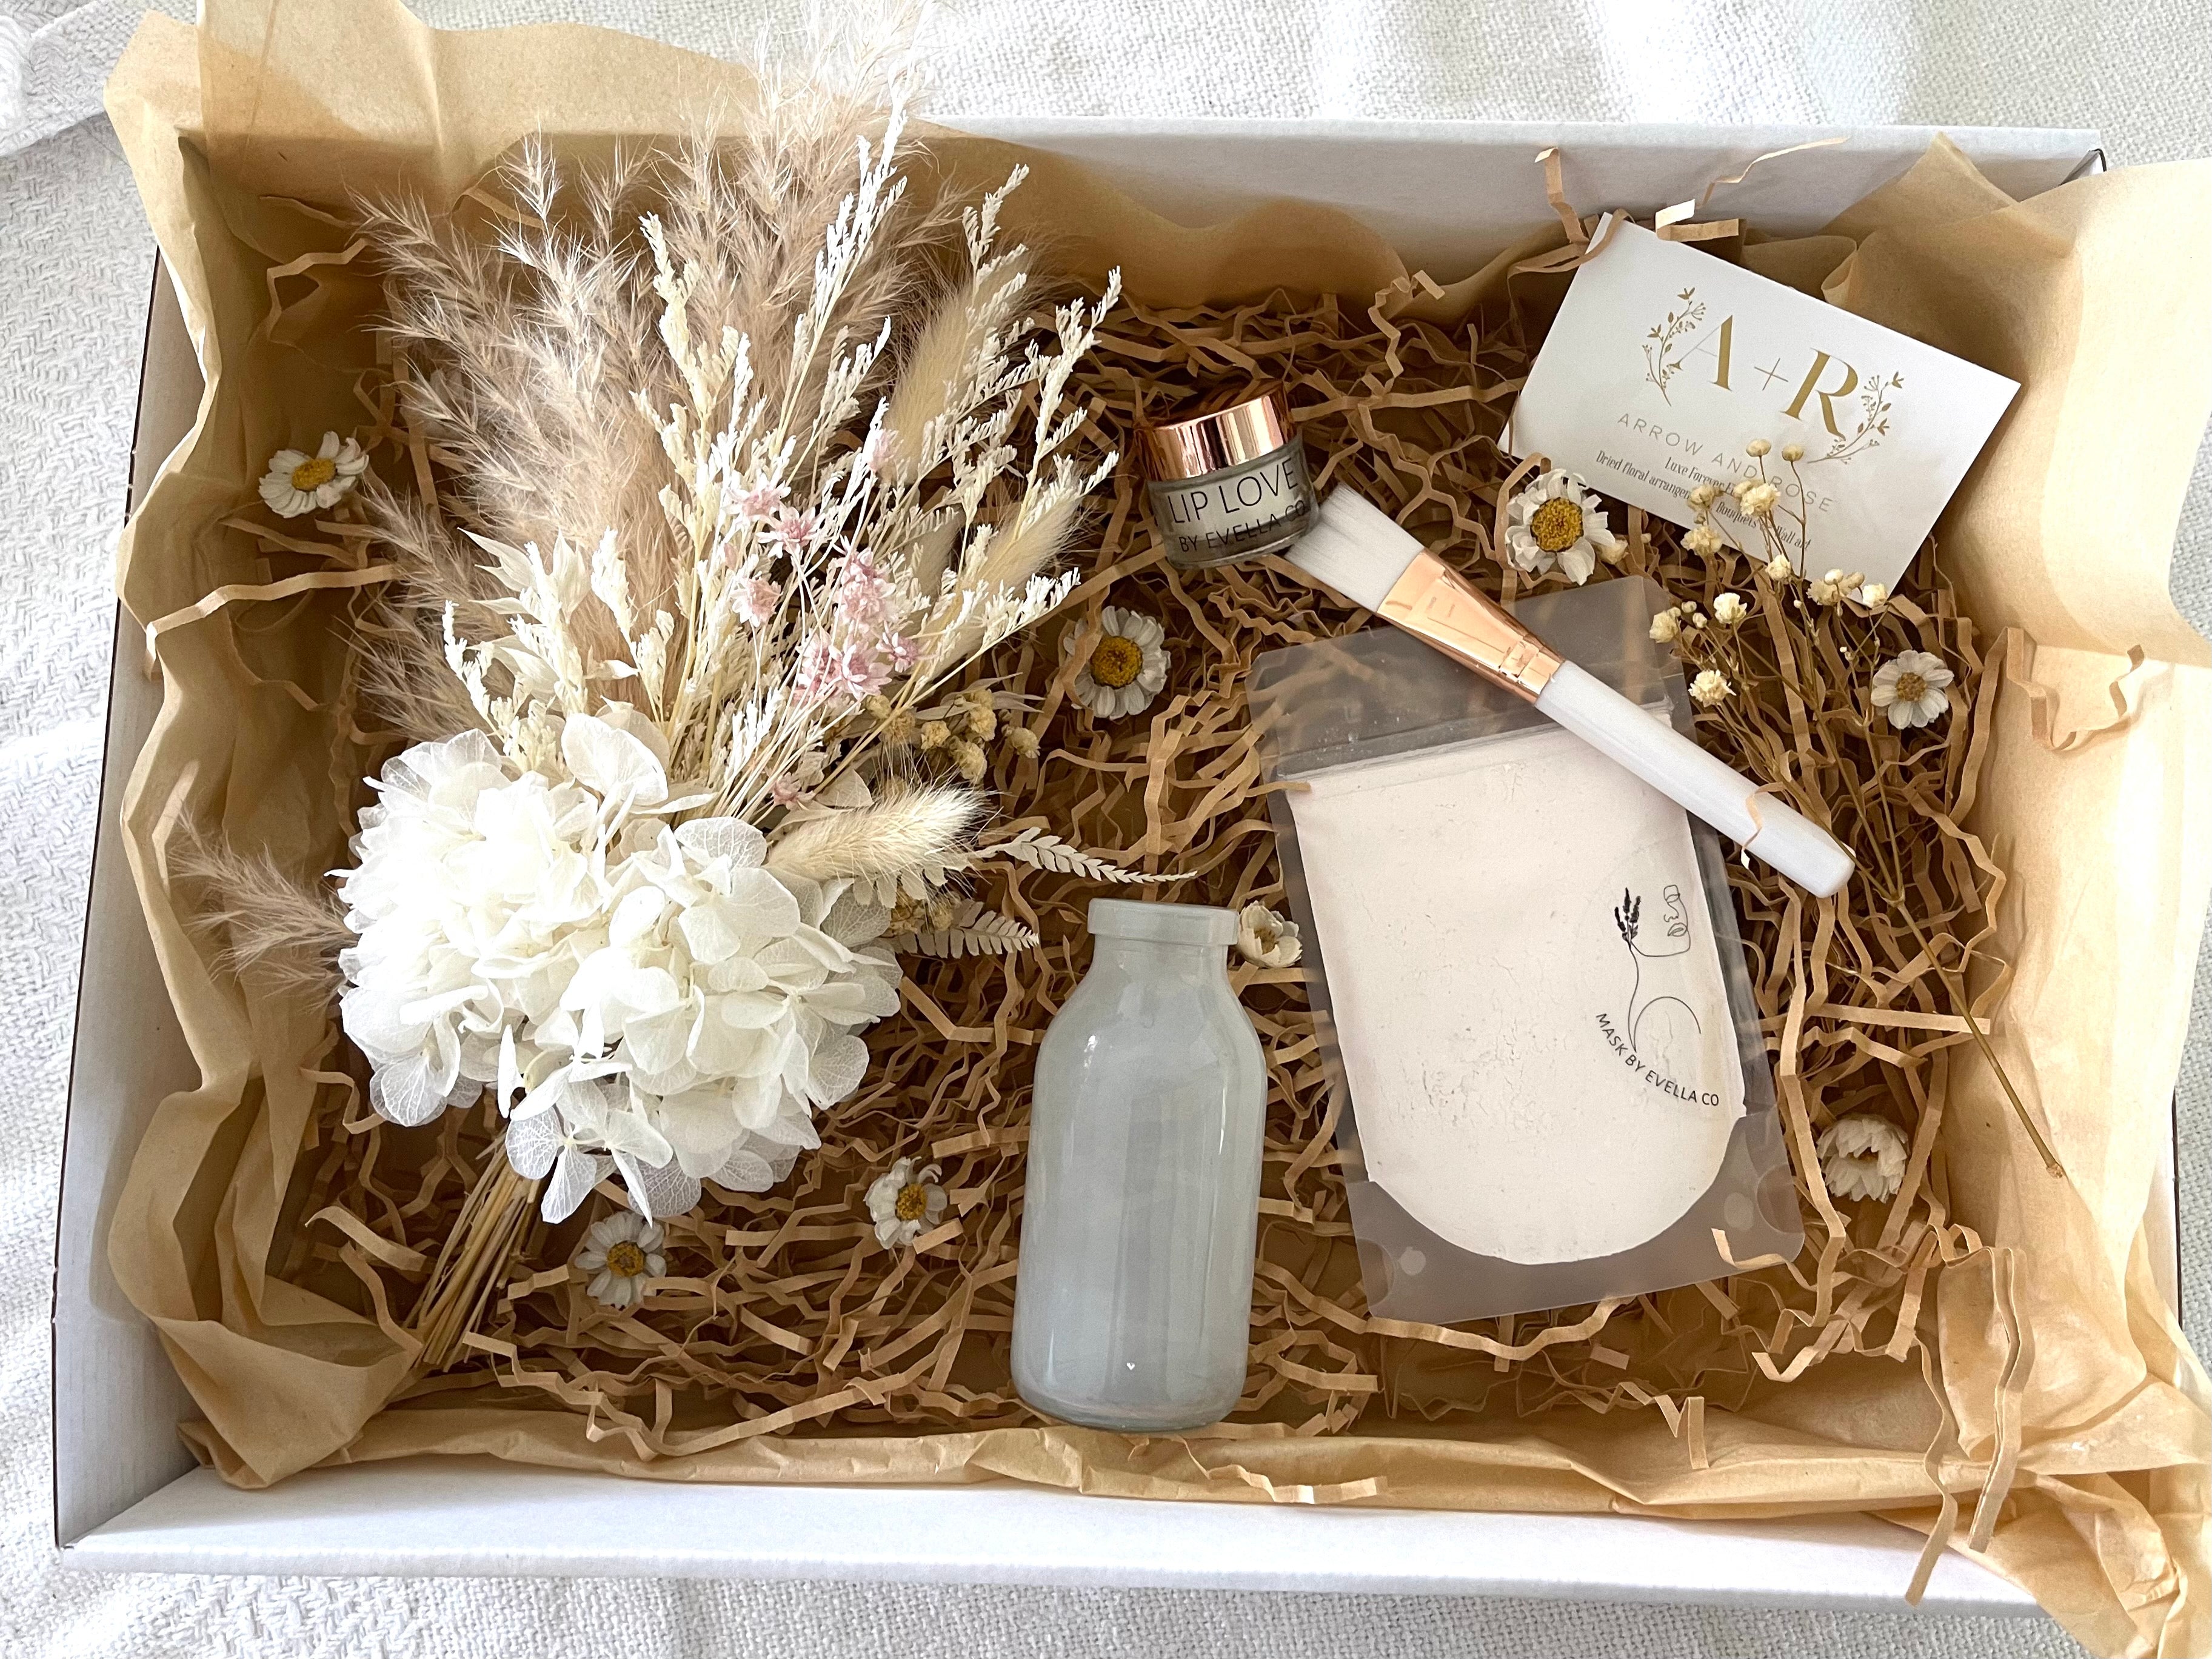 Luxe Everlasting face gift box.